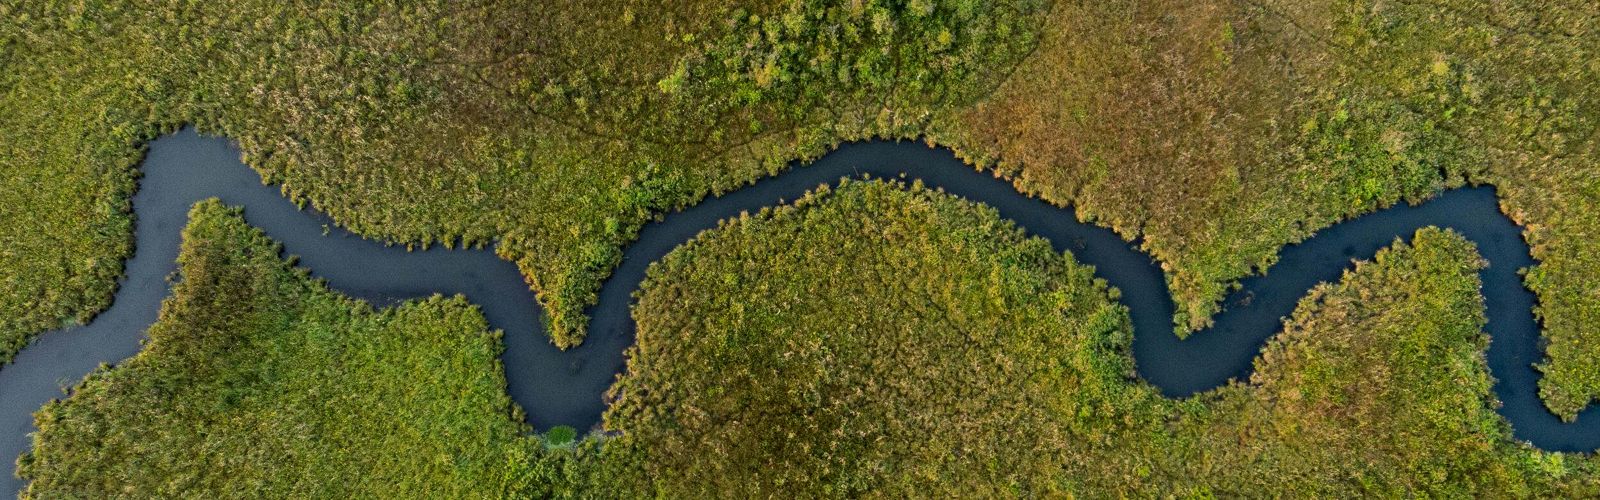 Aerial of dense forest carved by a curving blue river